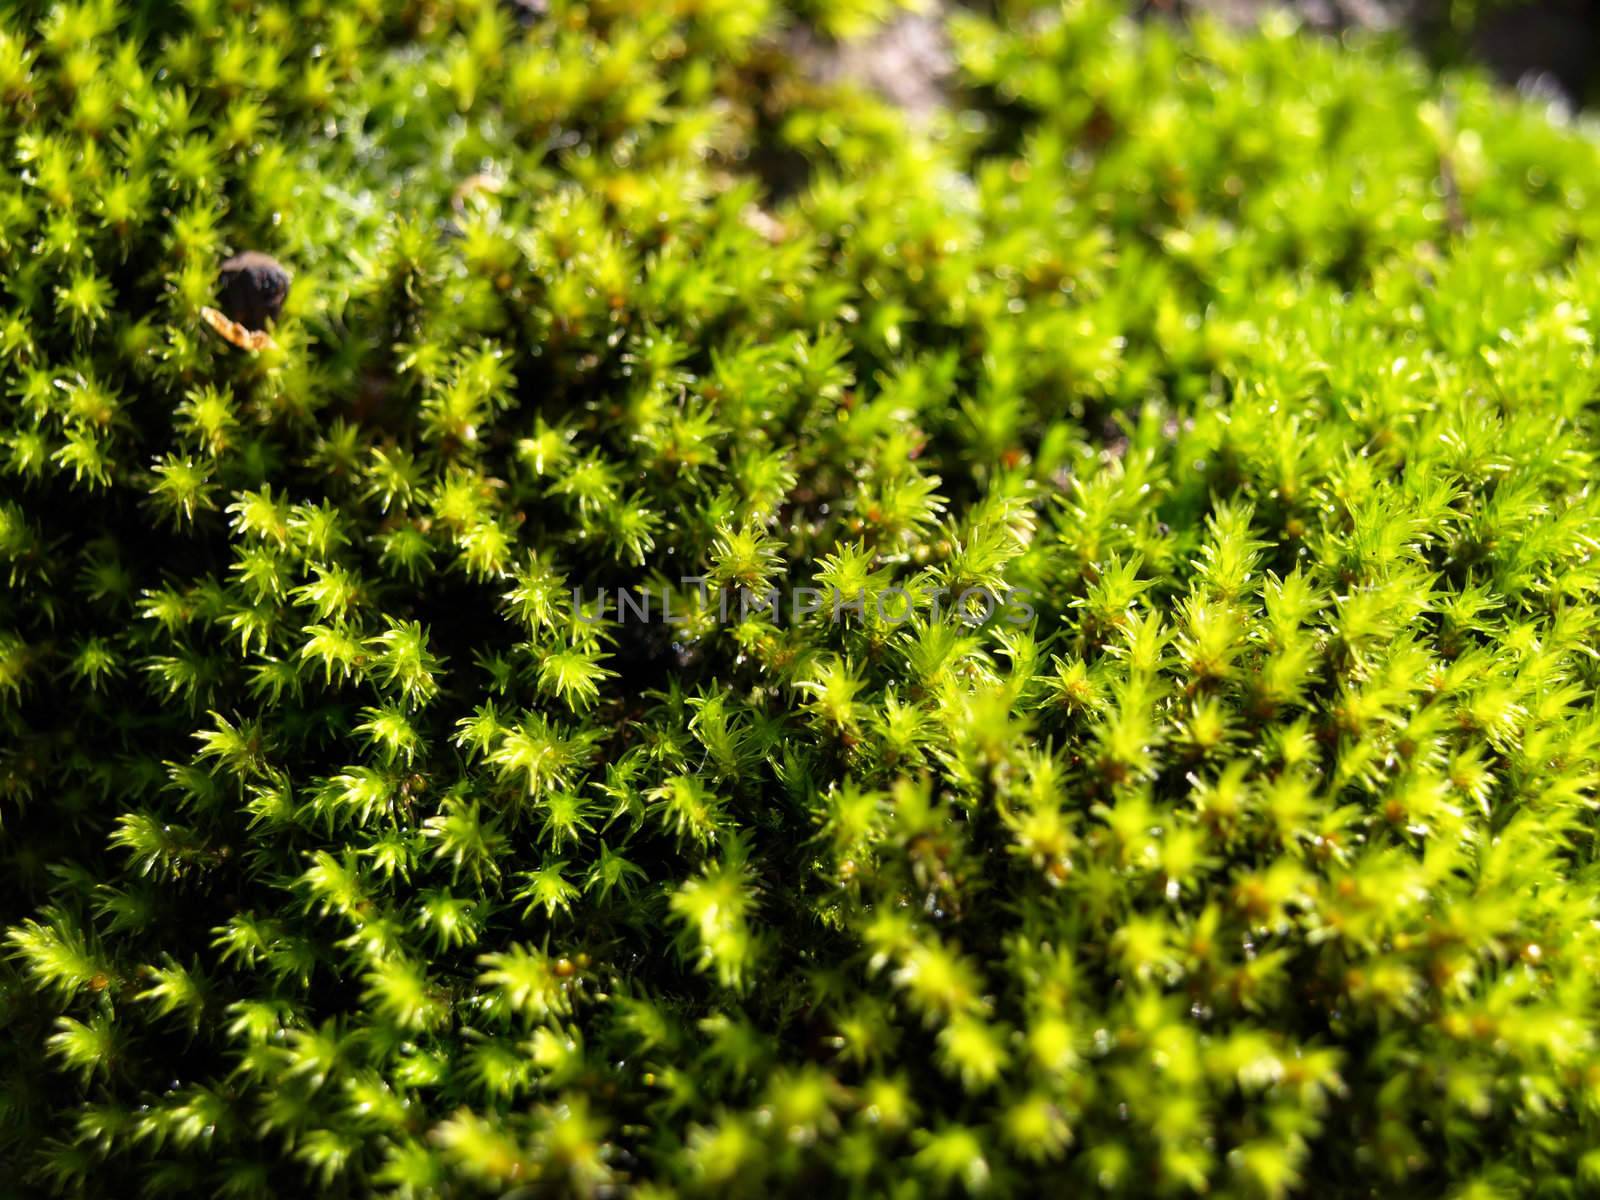 Vibrant green Oregon moss growing in the wild